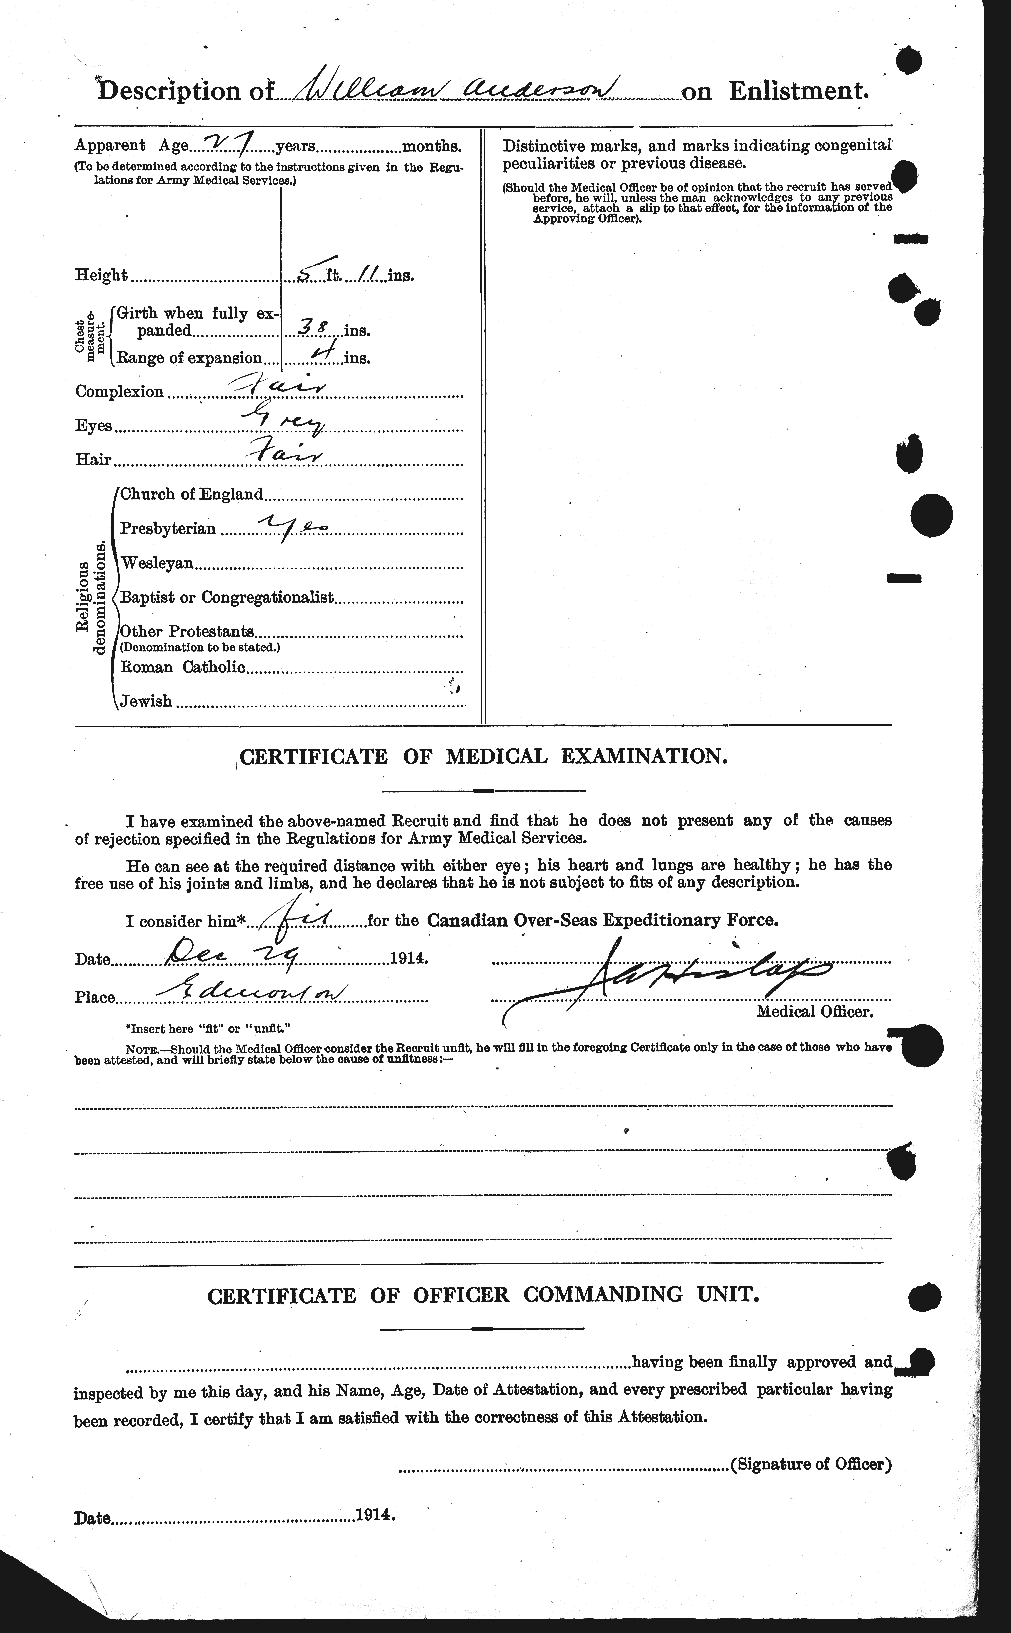 Personnel Records of the First World War - CEF 210765b